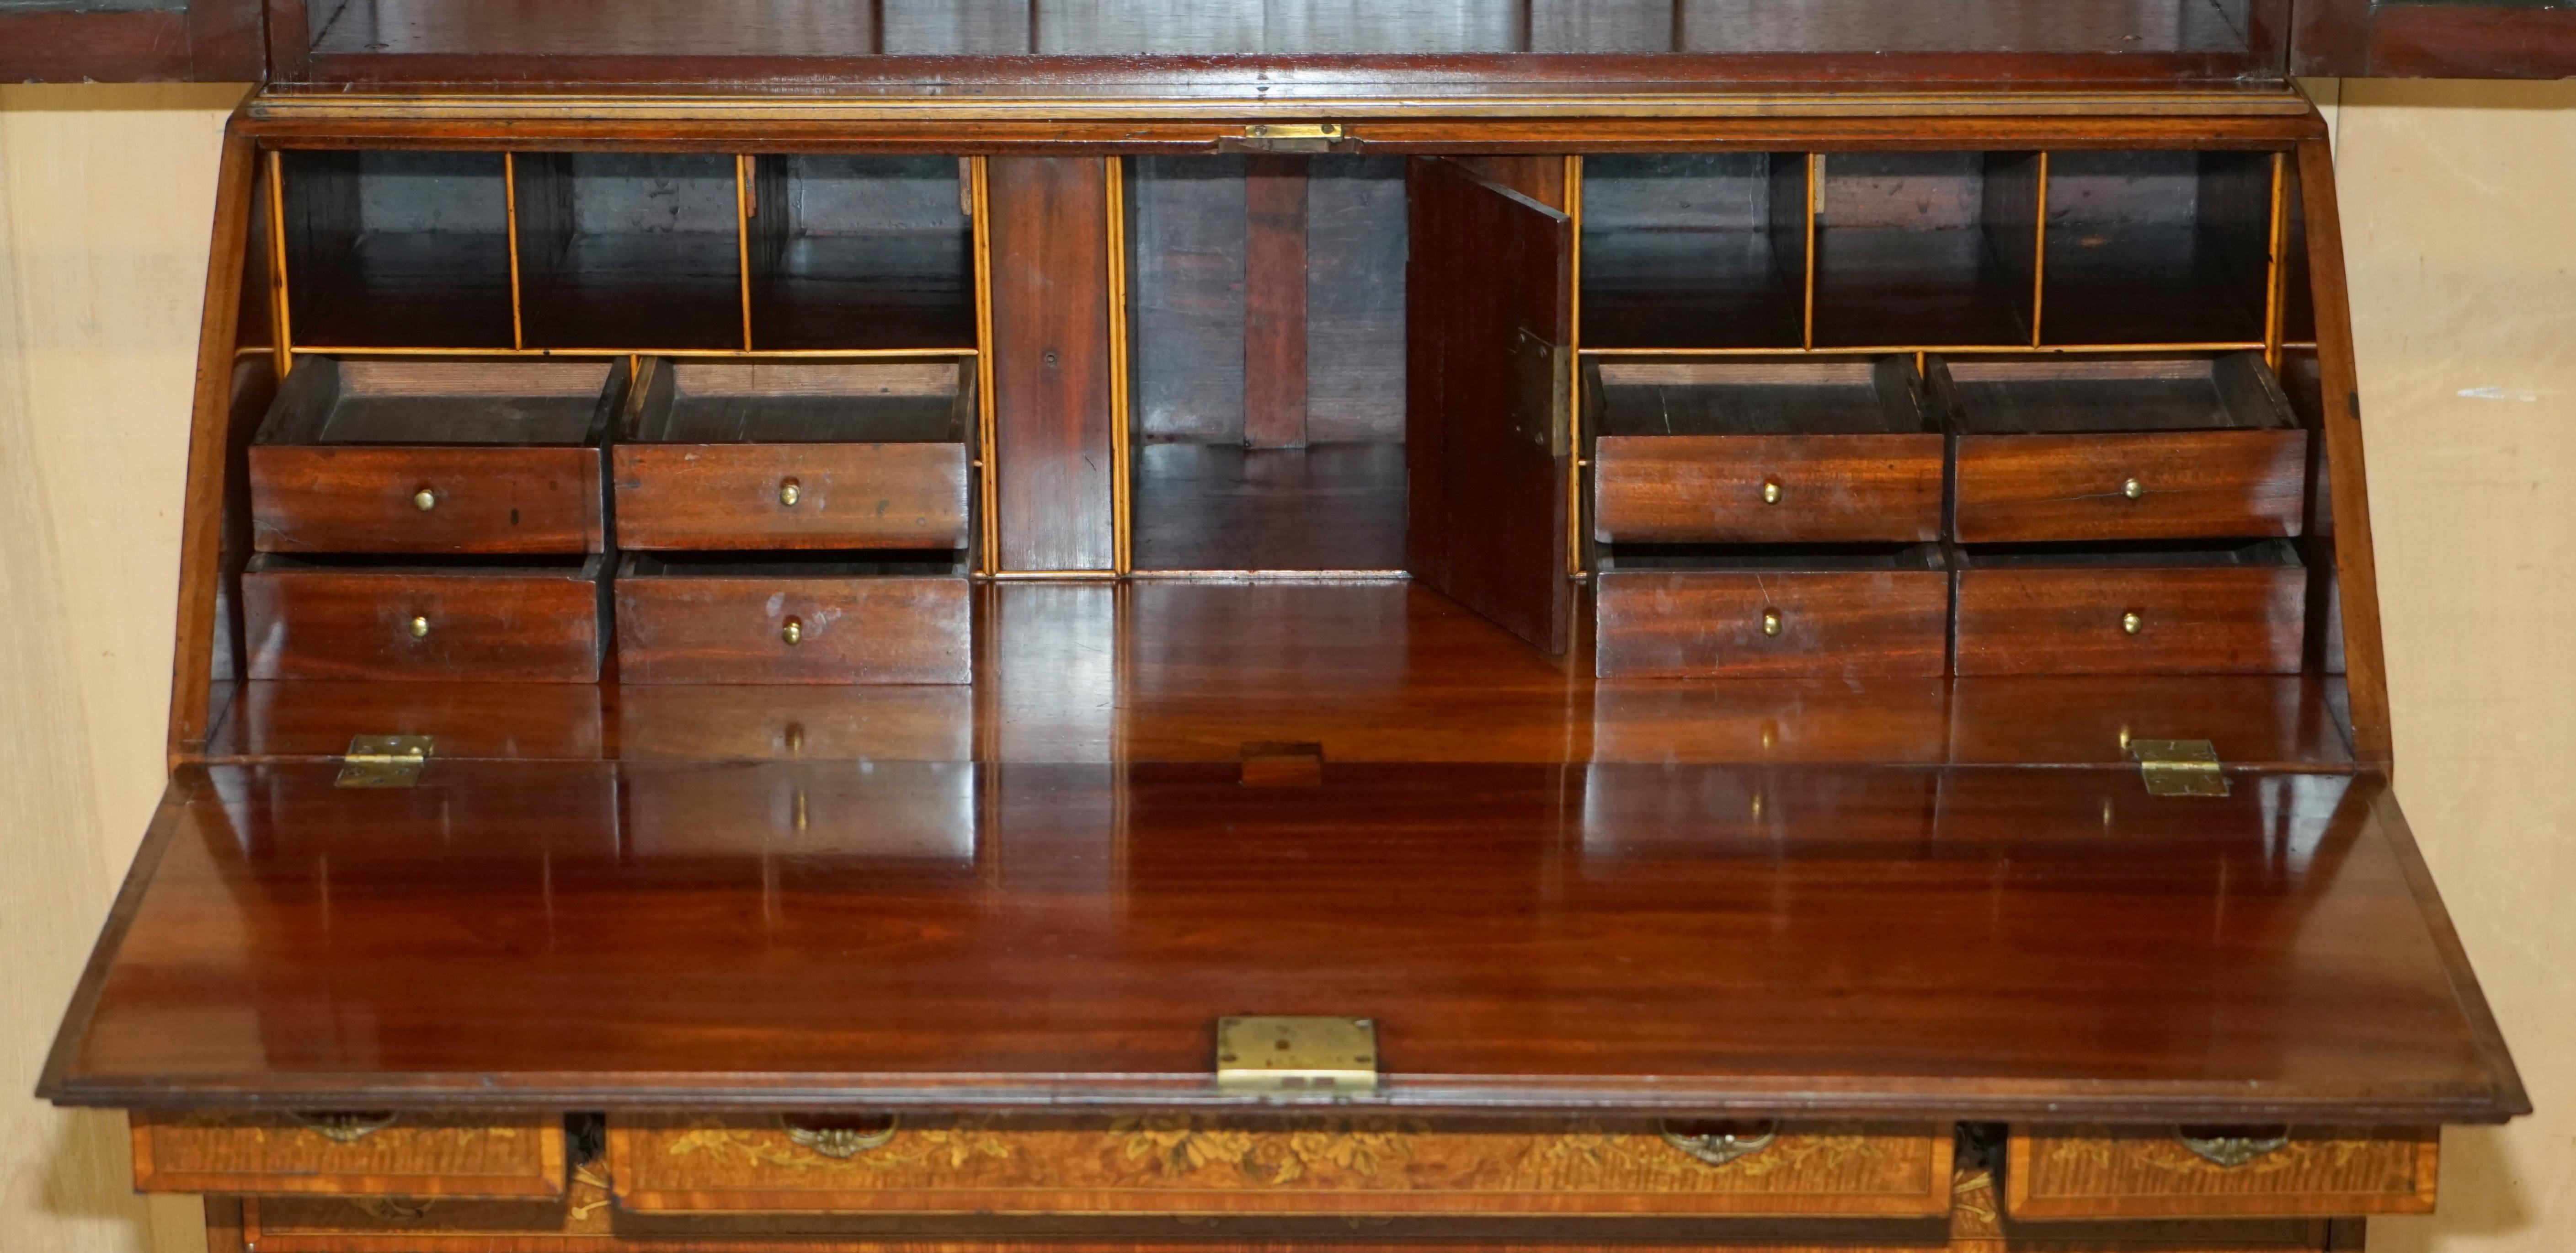 STUNNiNG ANTIQUE CIRCA 1840 SHERATON REVIVAL LIBRARY BUREAU BOOKCASE ON DRAWERS For Sale 12